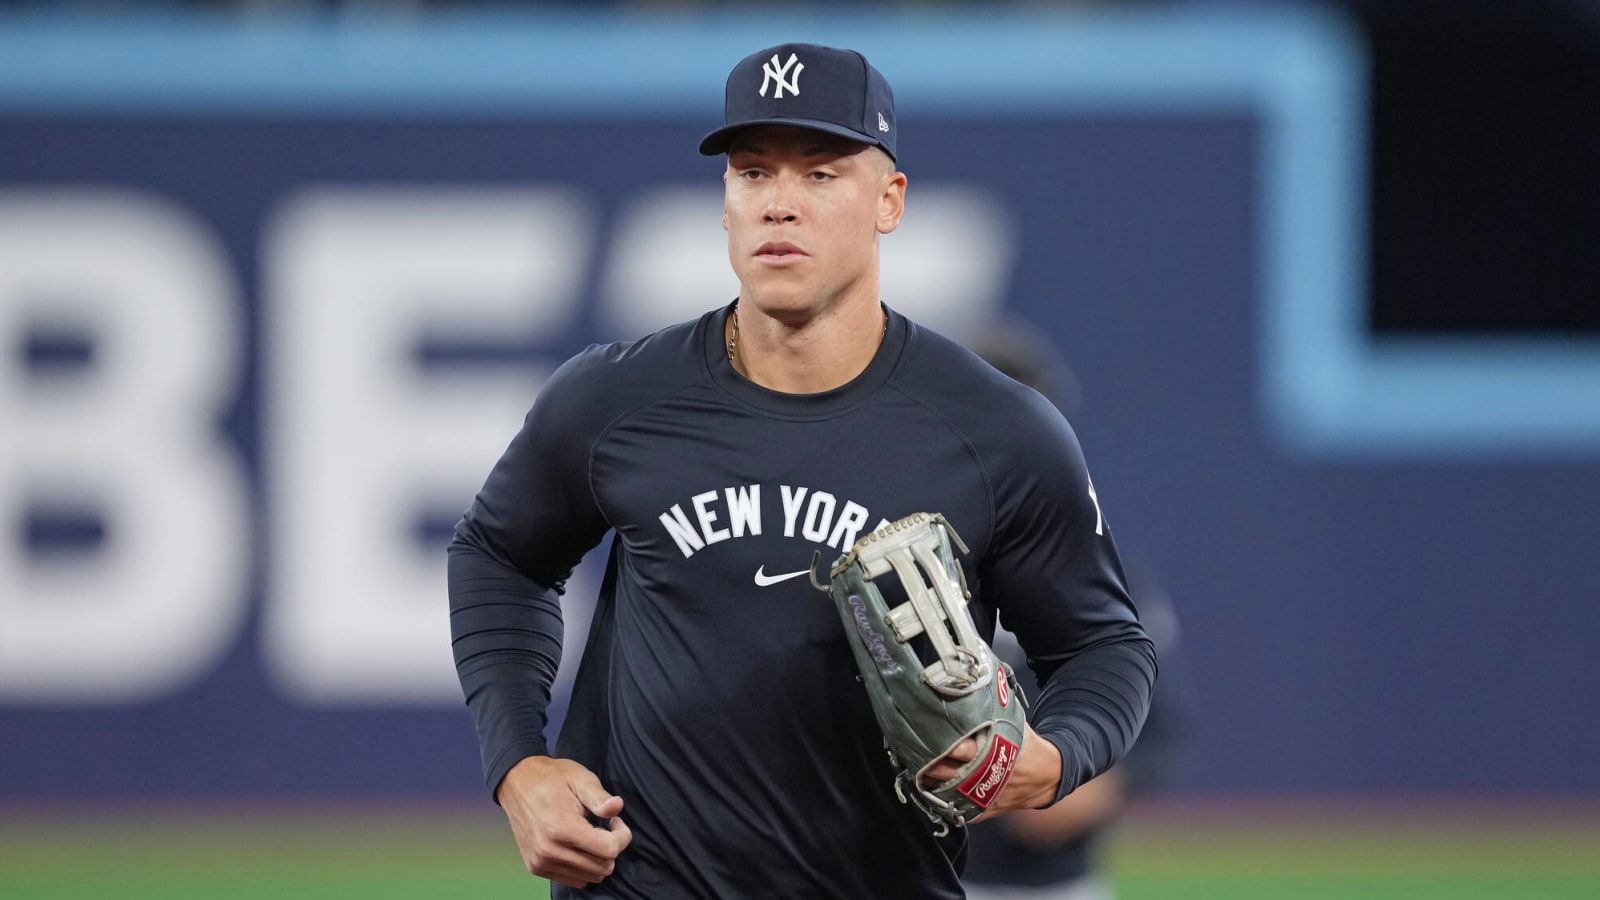 MLB Power Rankings: Yankees maintain No. 1 spot, but competition is close behind